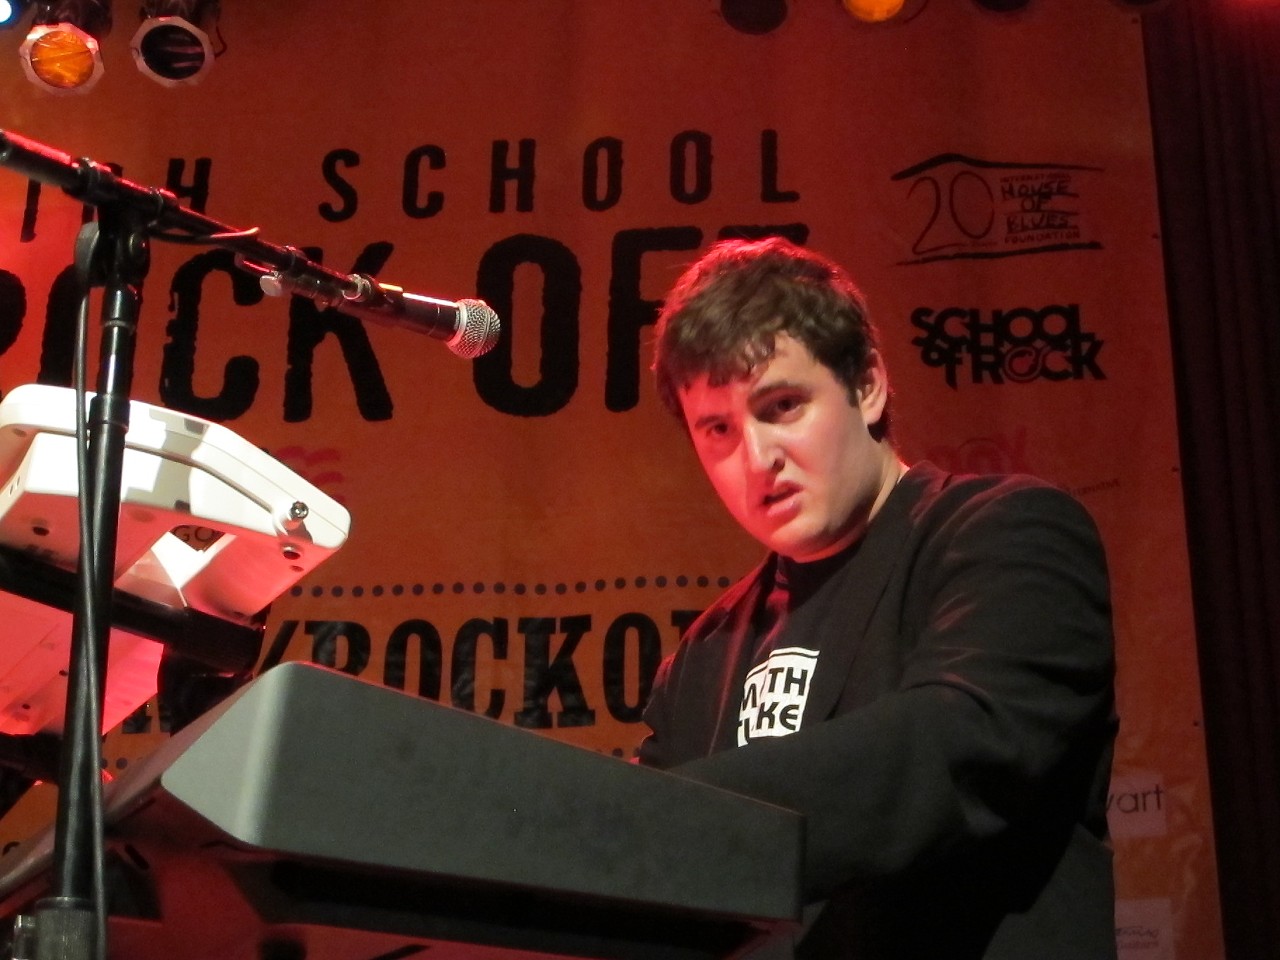 Photos from the 18th annual High School Rock Off Final Exam